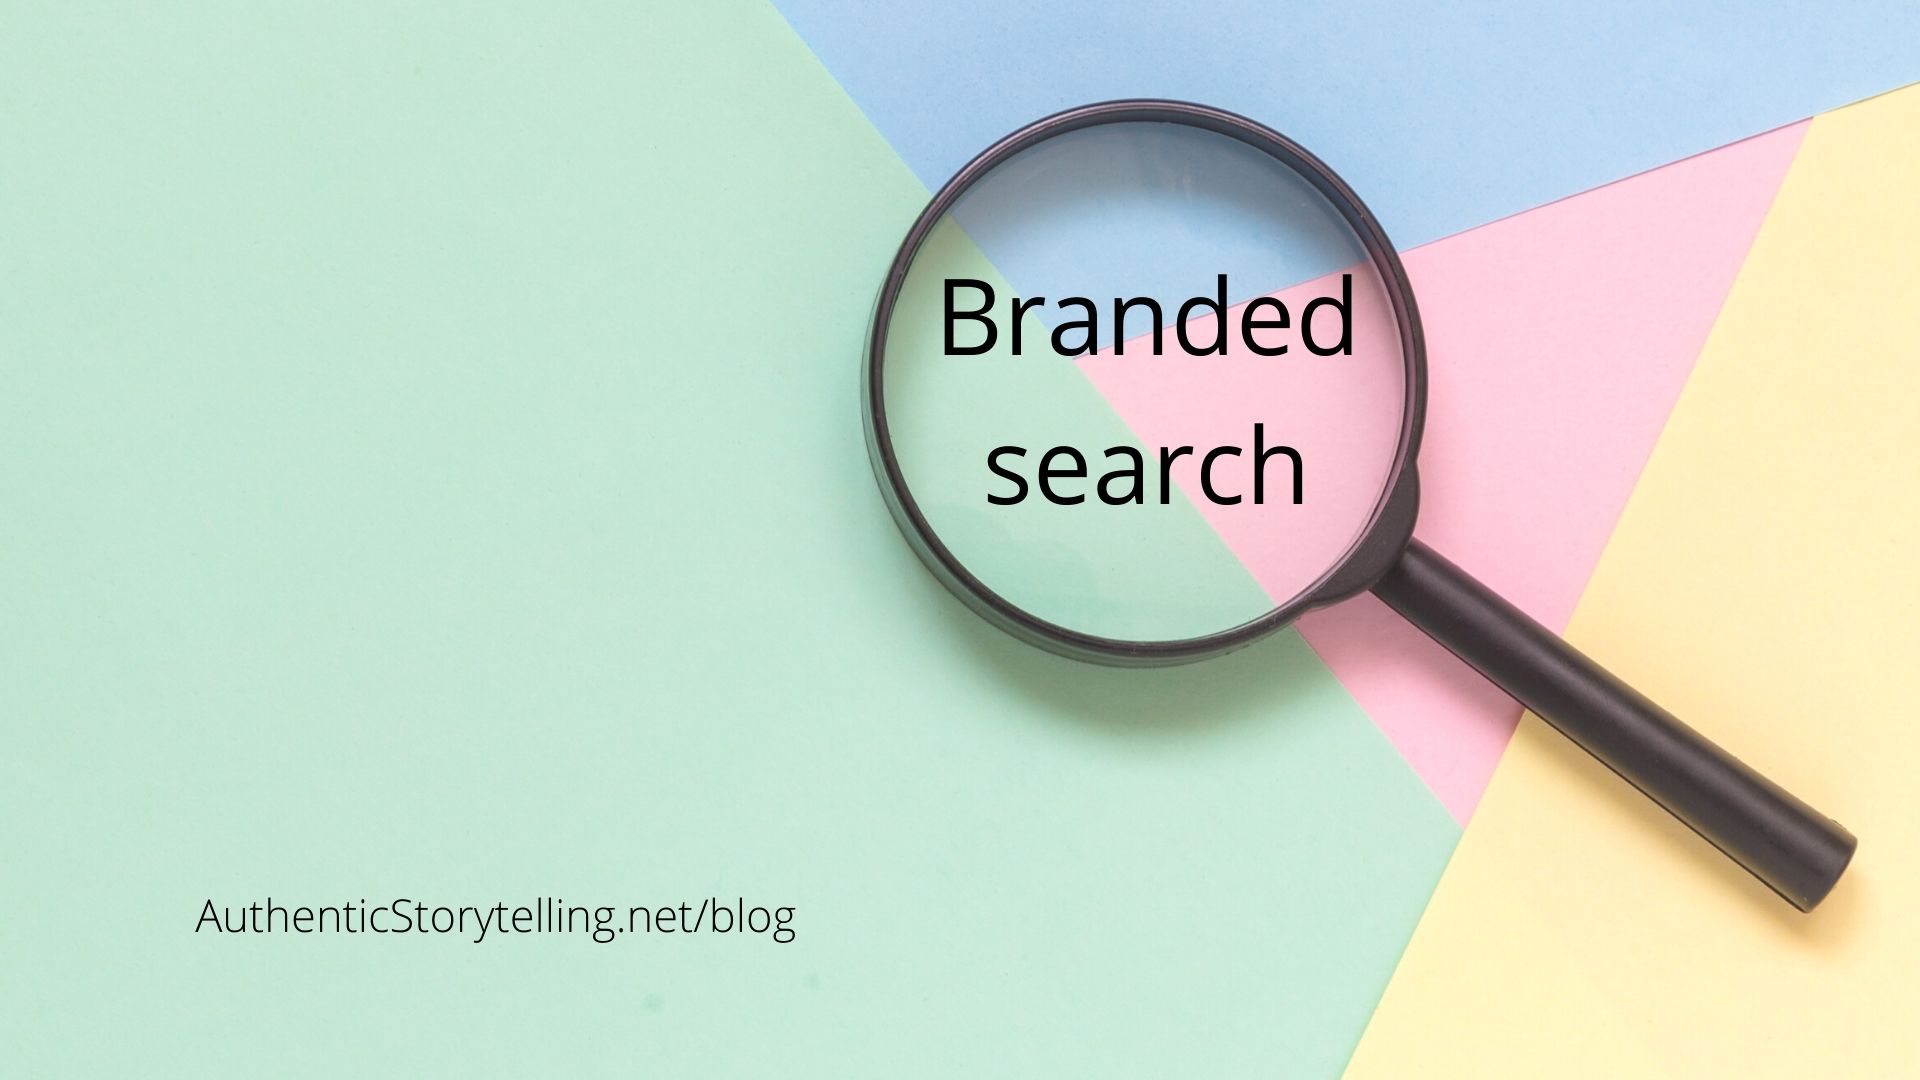 Branded search